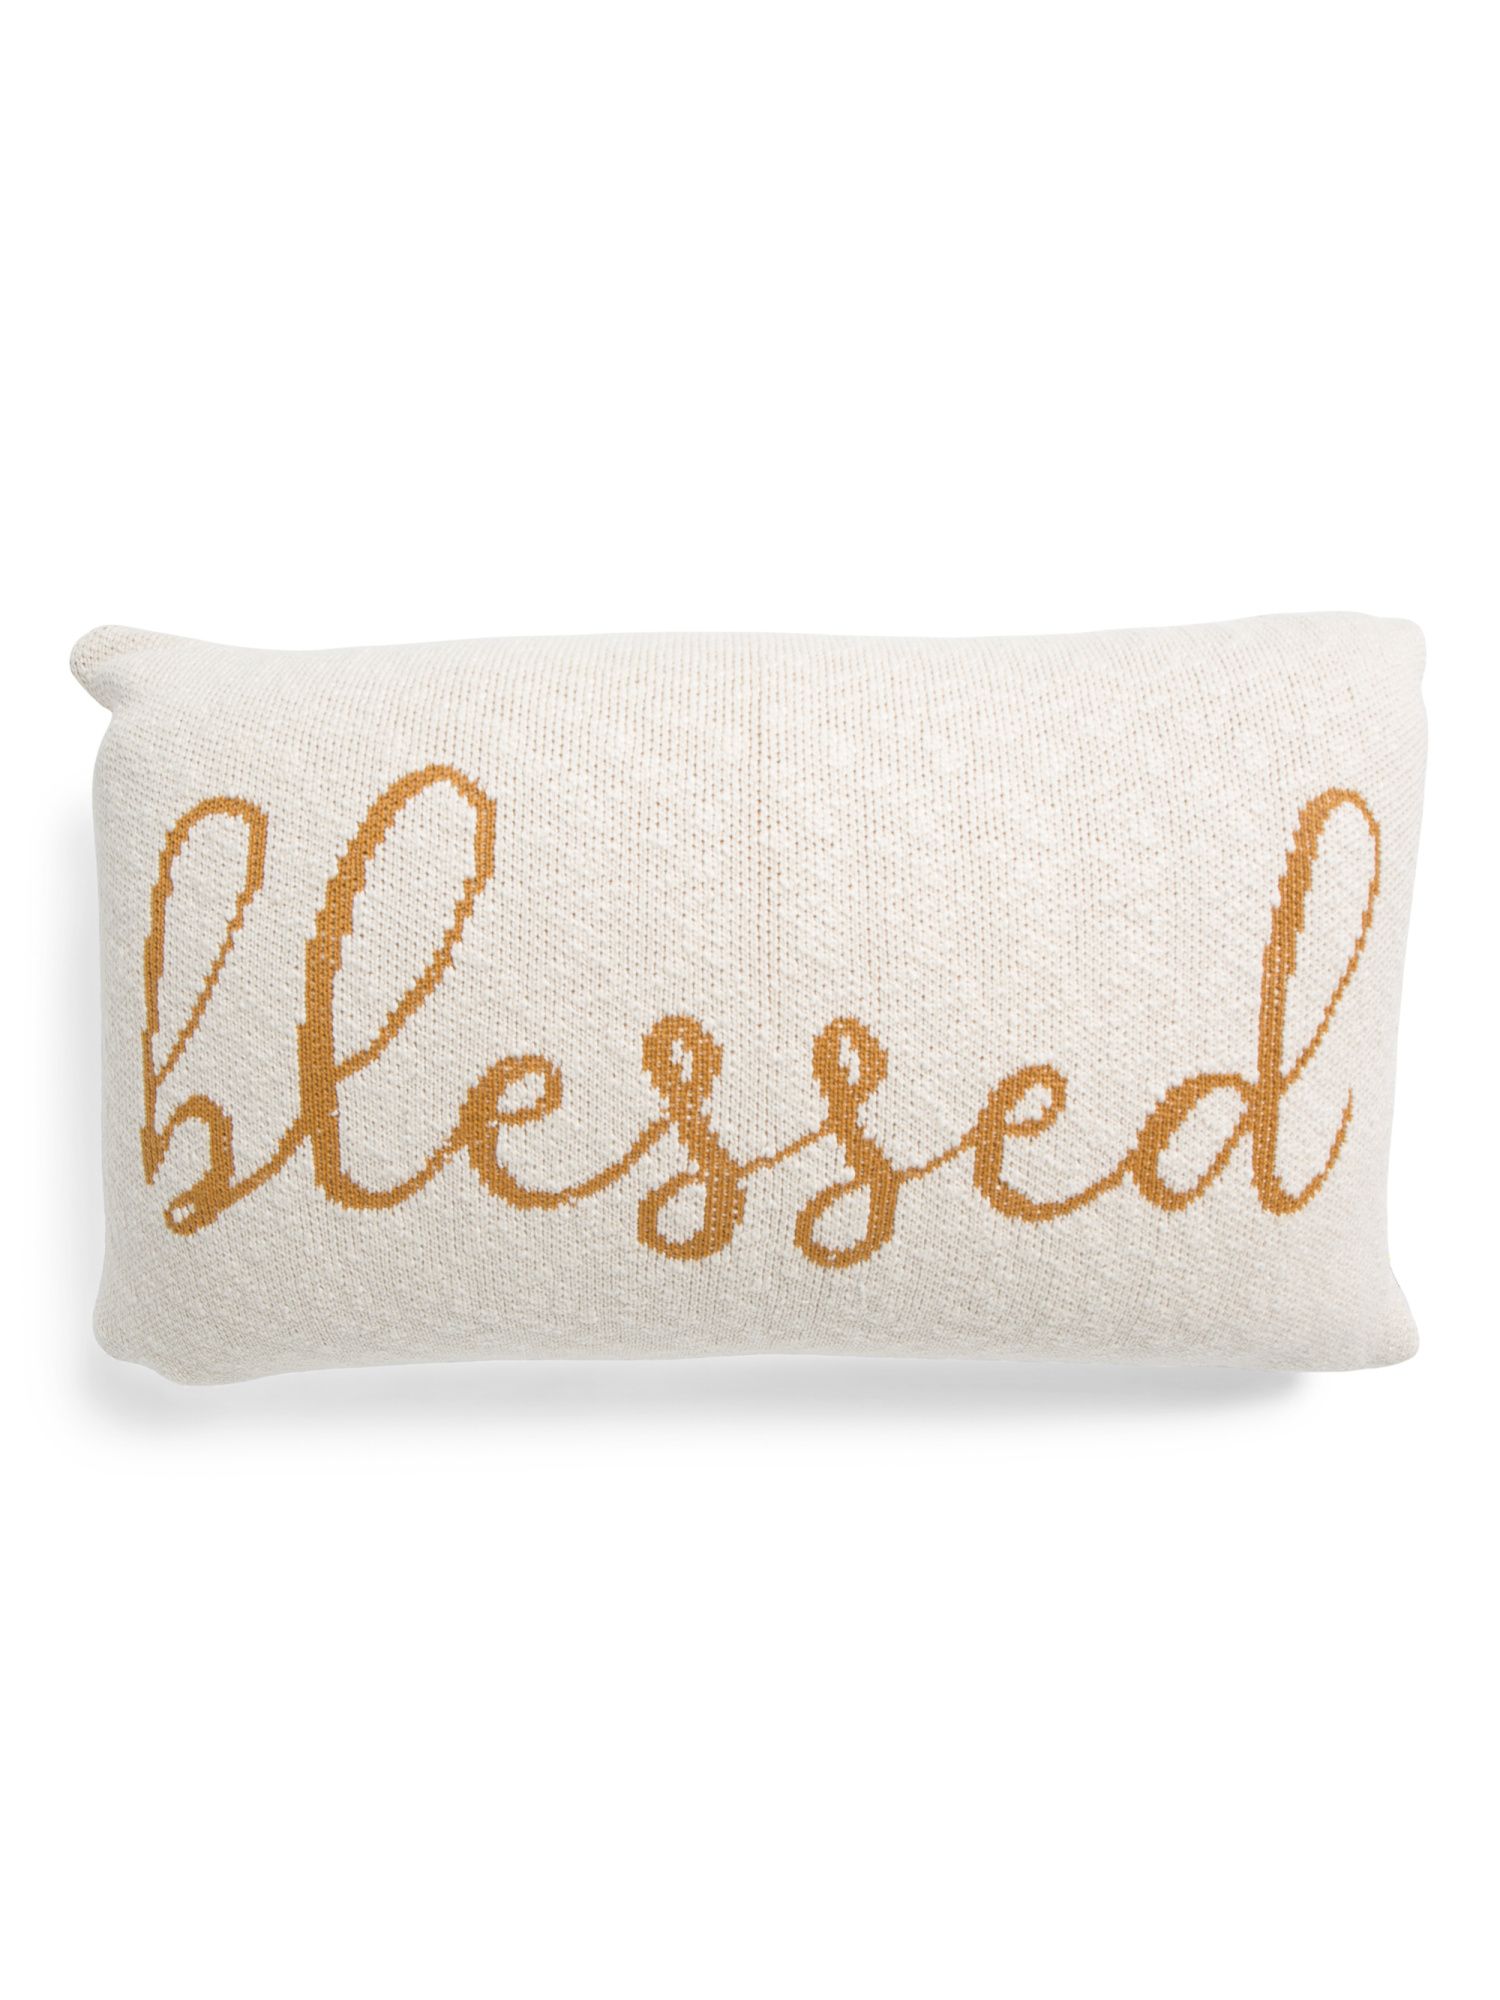 16x24 Soft Cotton Blessed Pillow | Marshalls